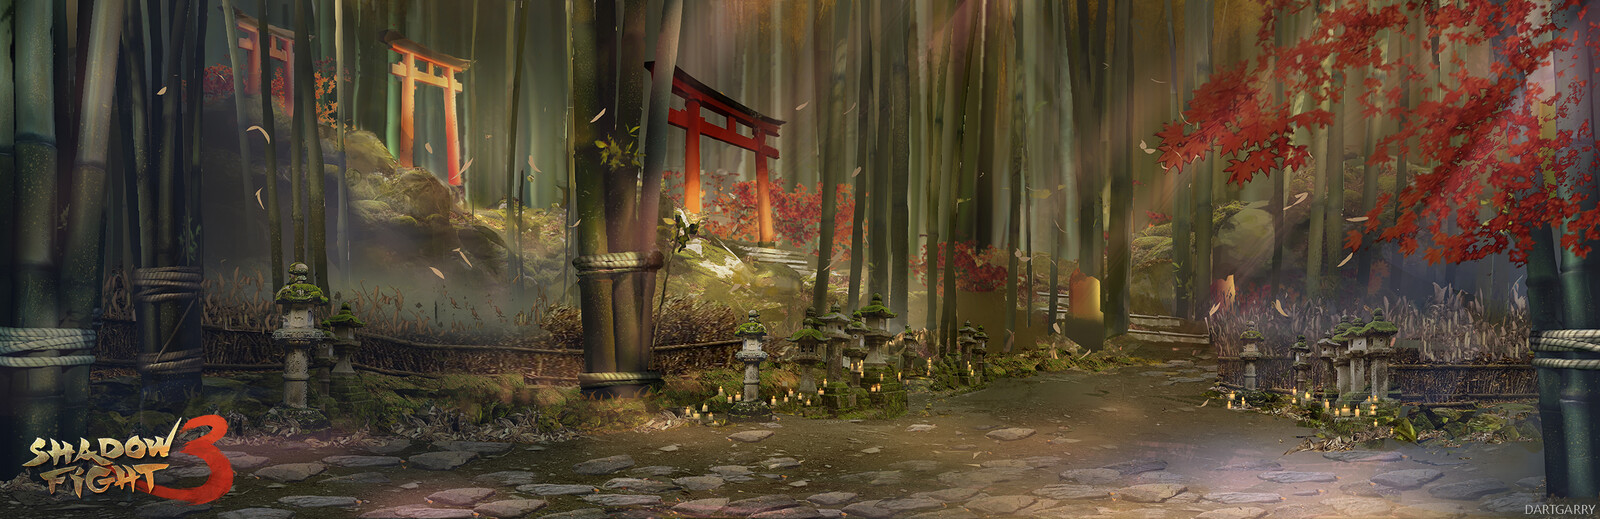 Bamboo location concept